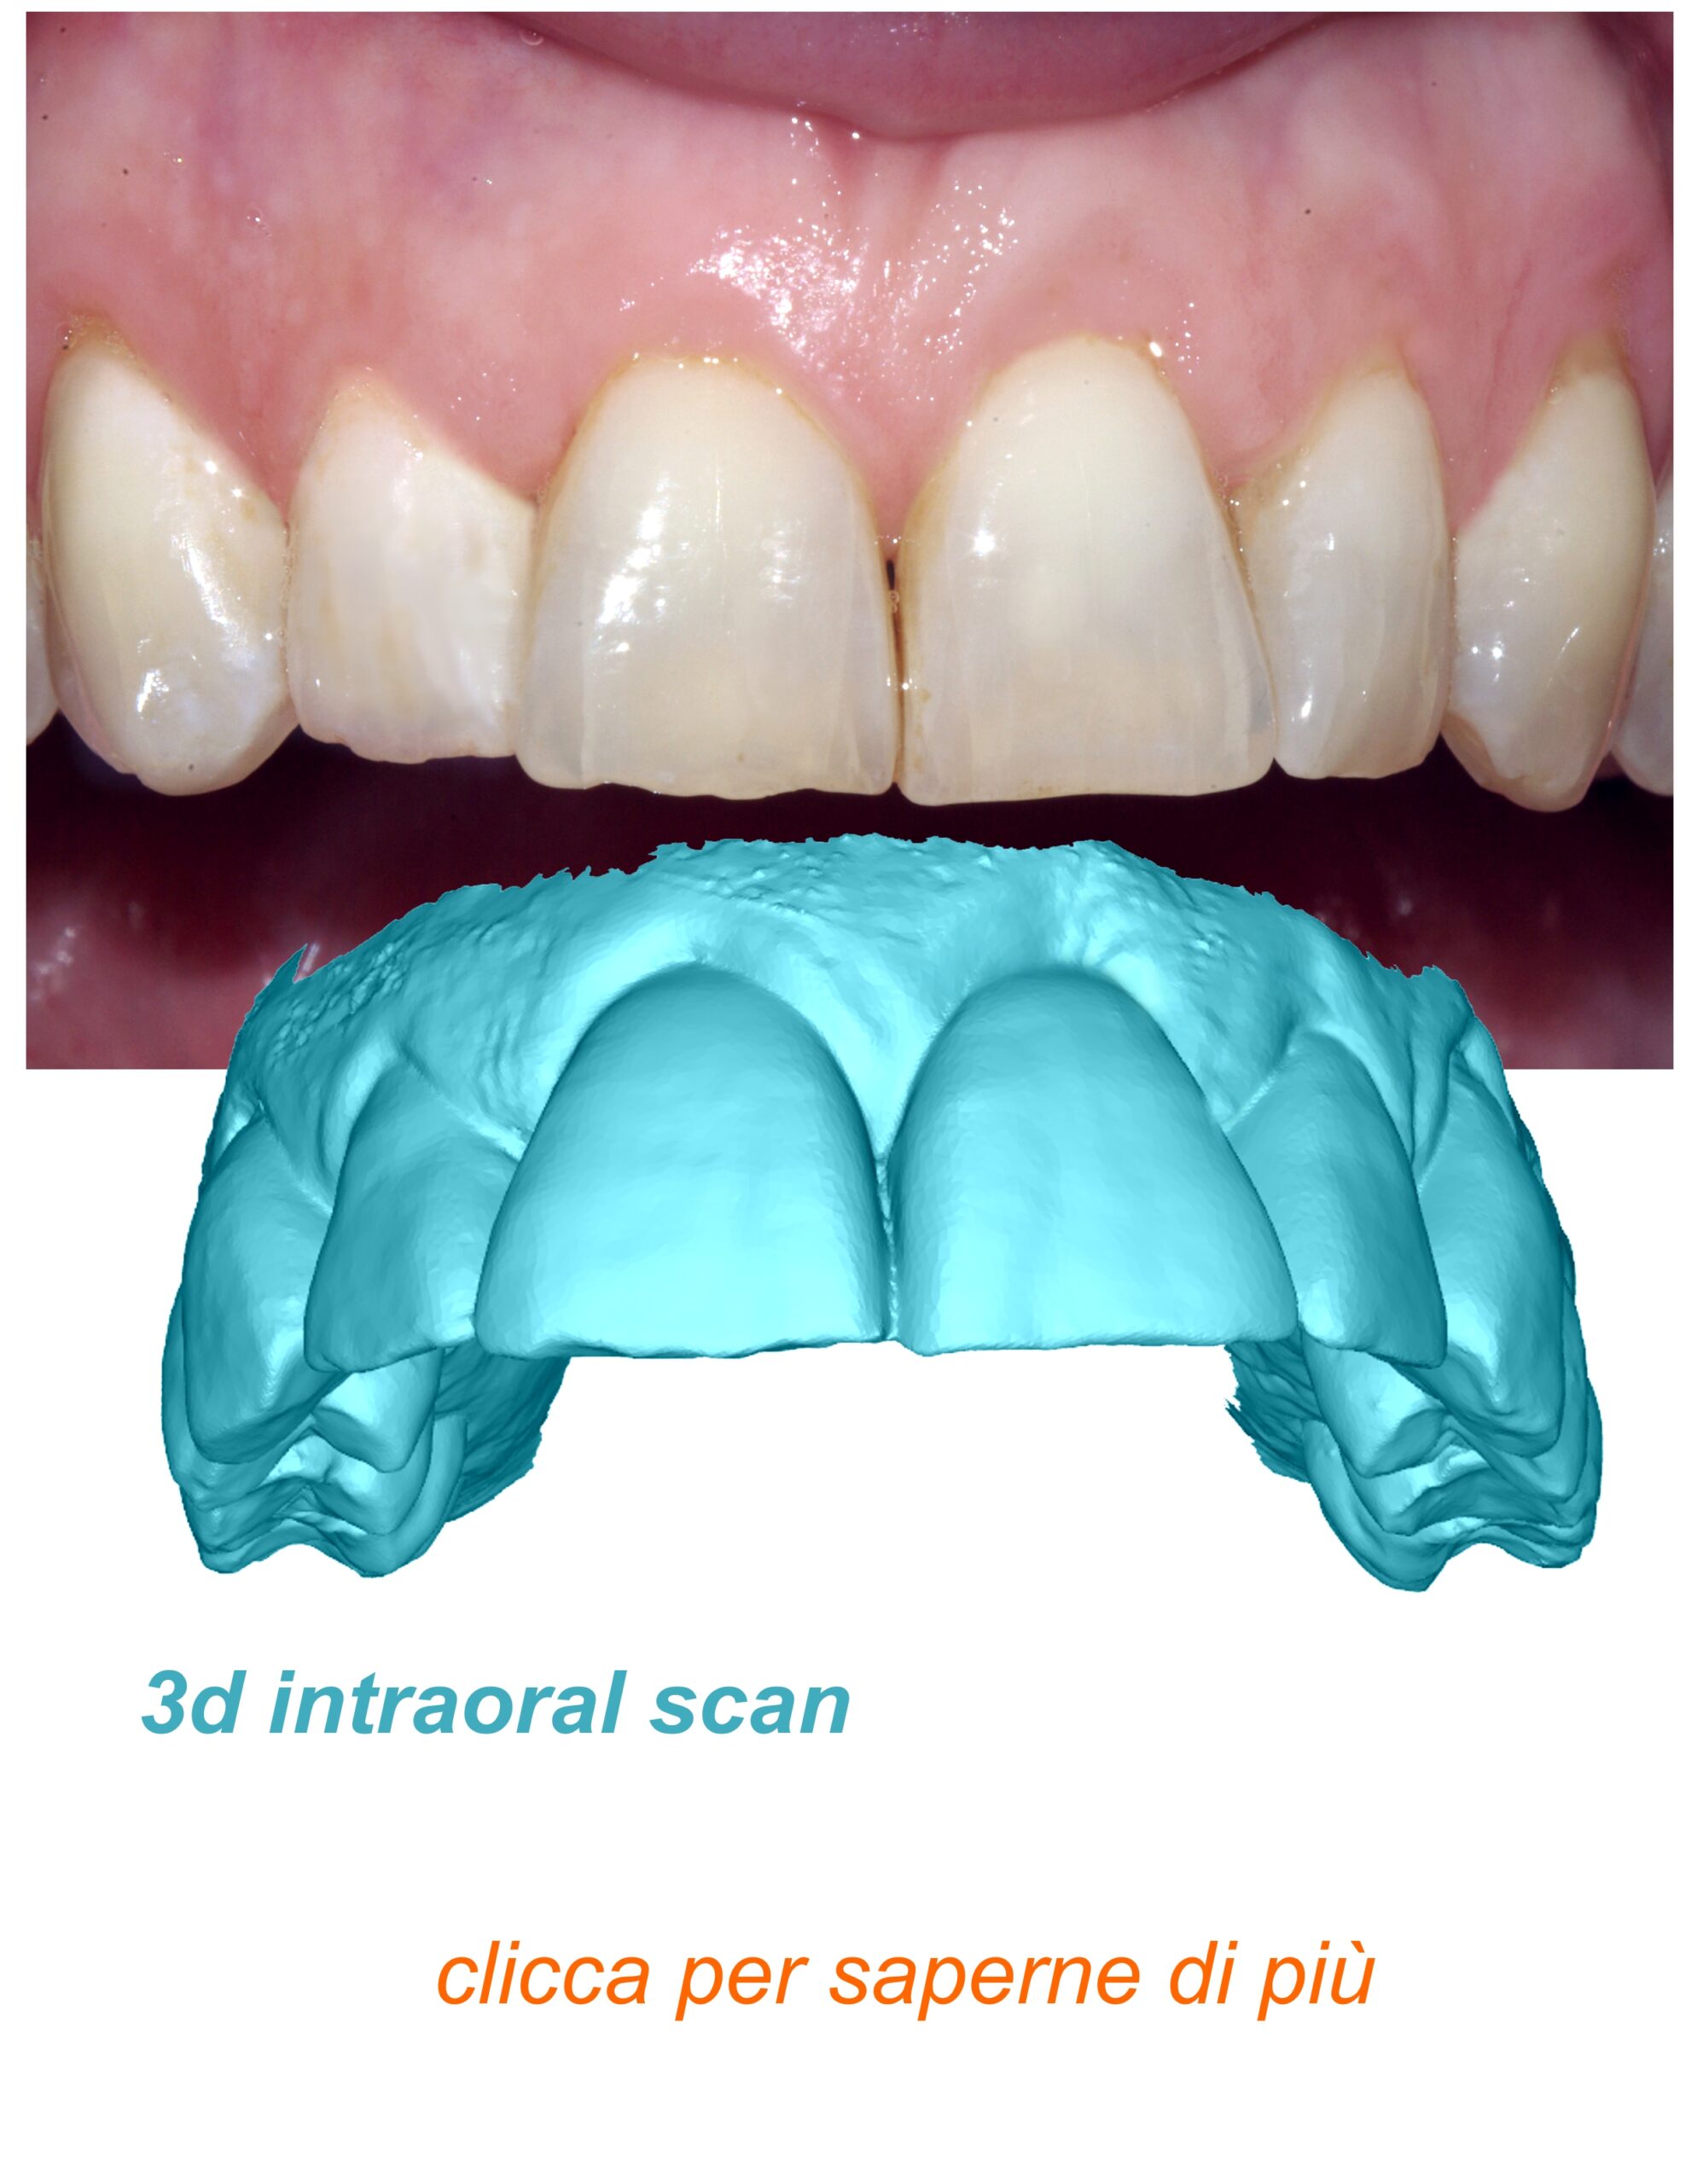 intraoral scan